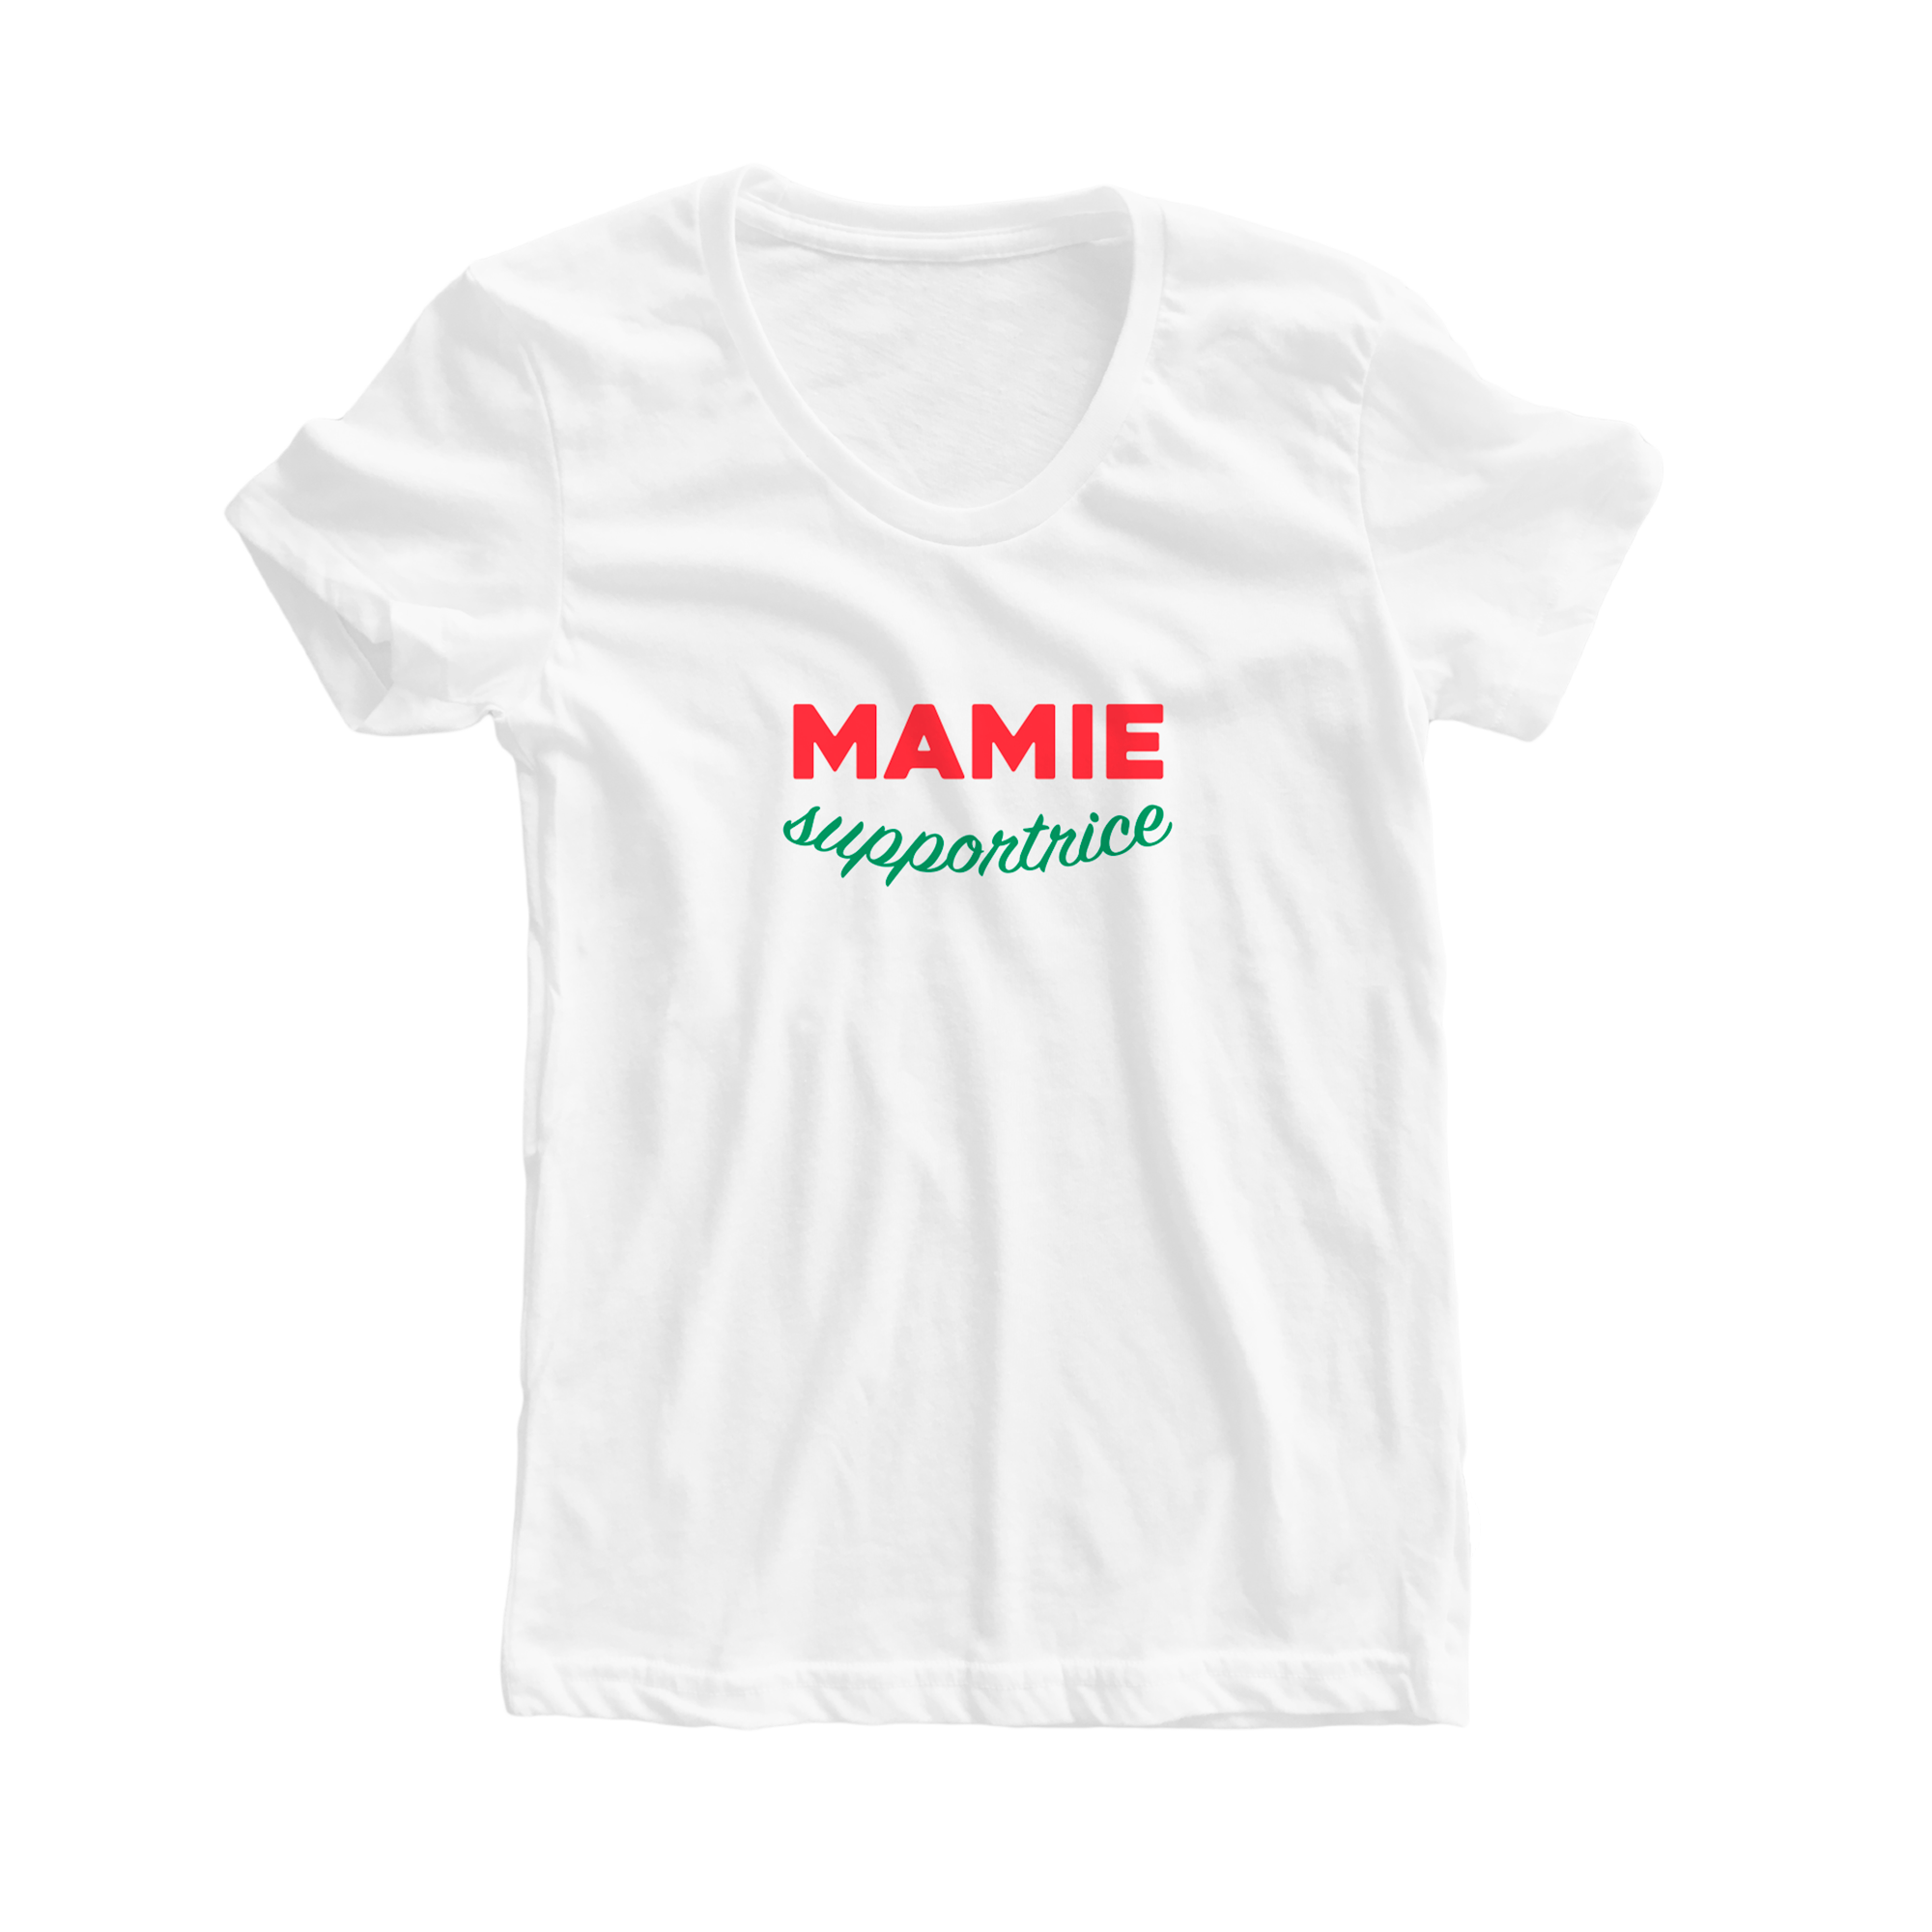 MAMIE supportrice - T-SHIRT (Femme)